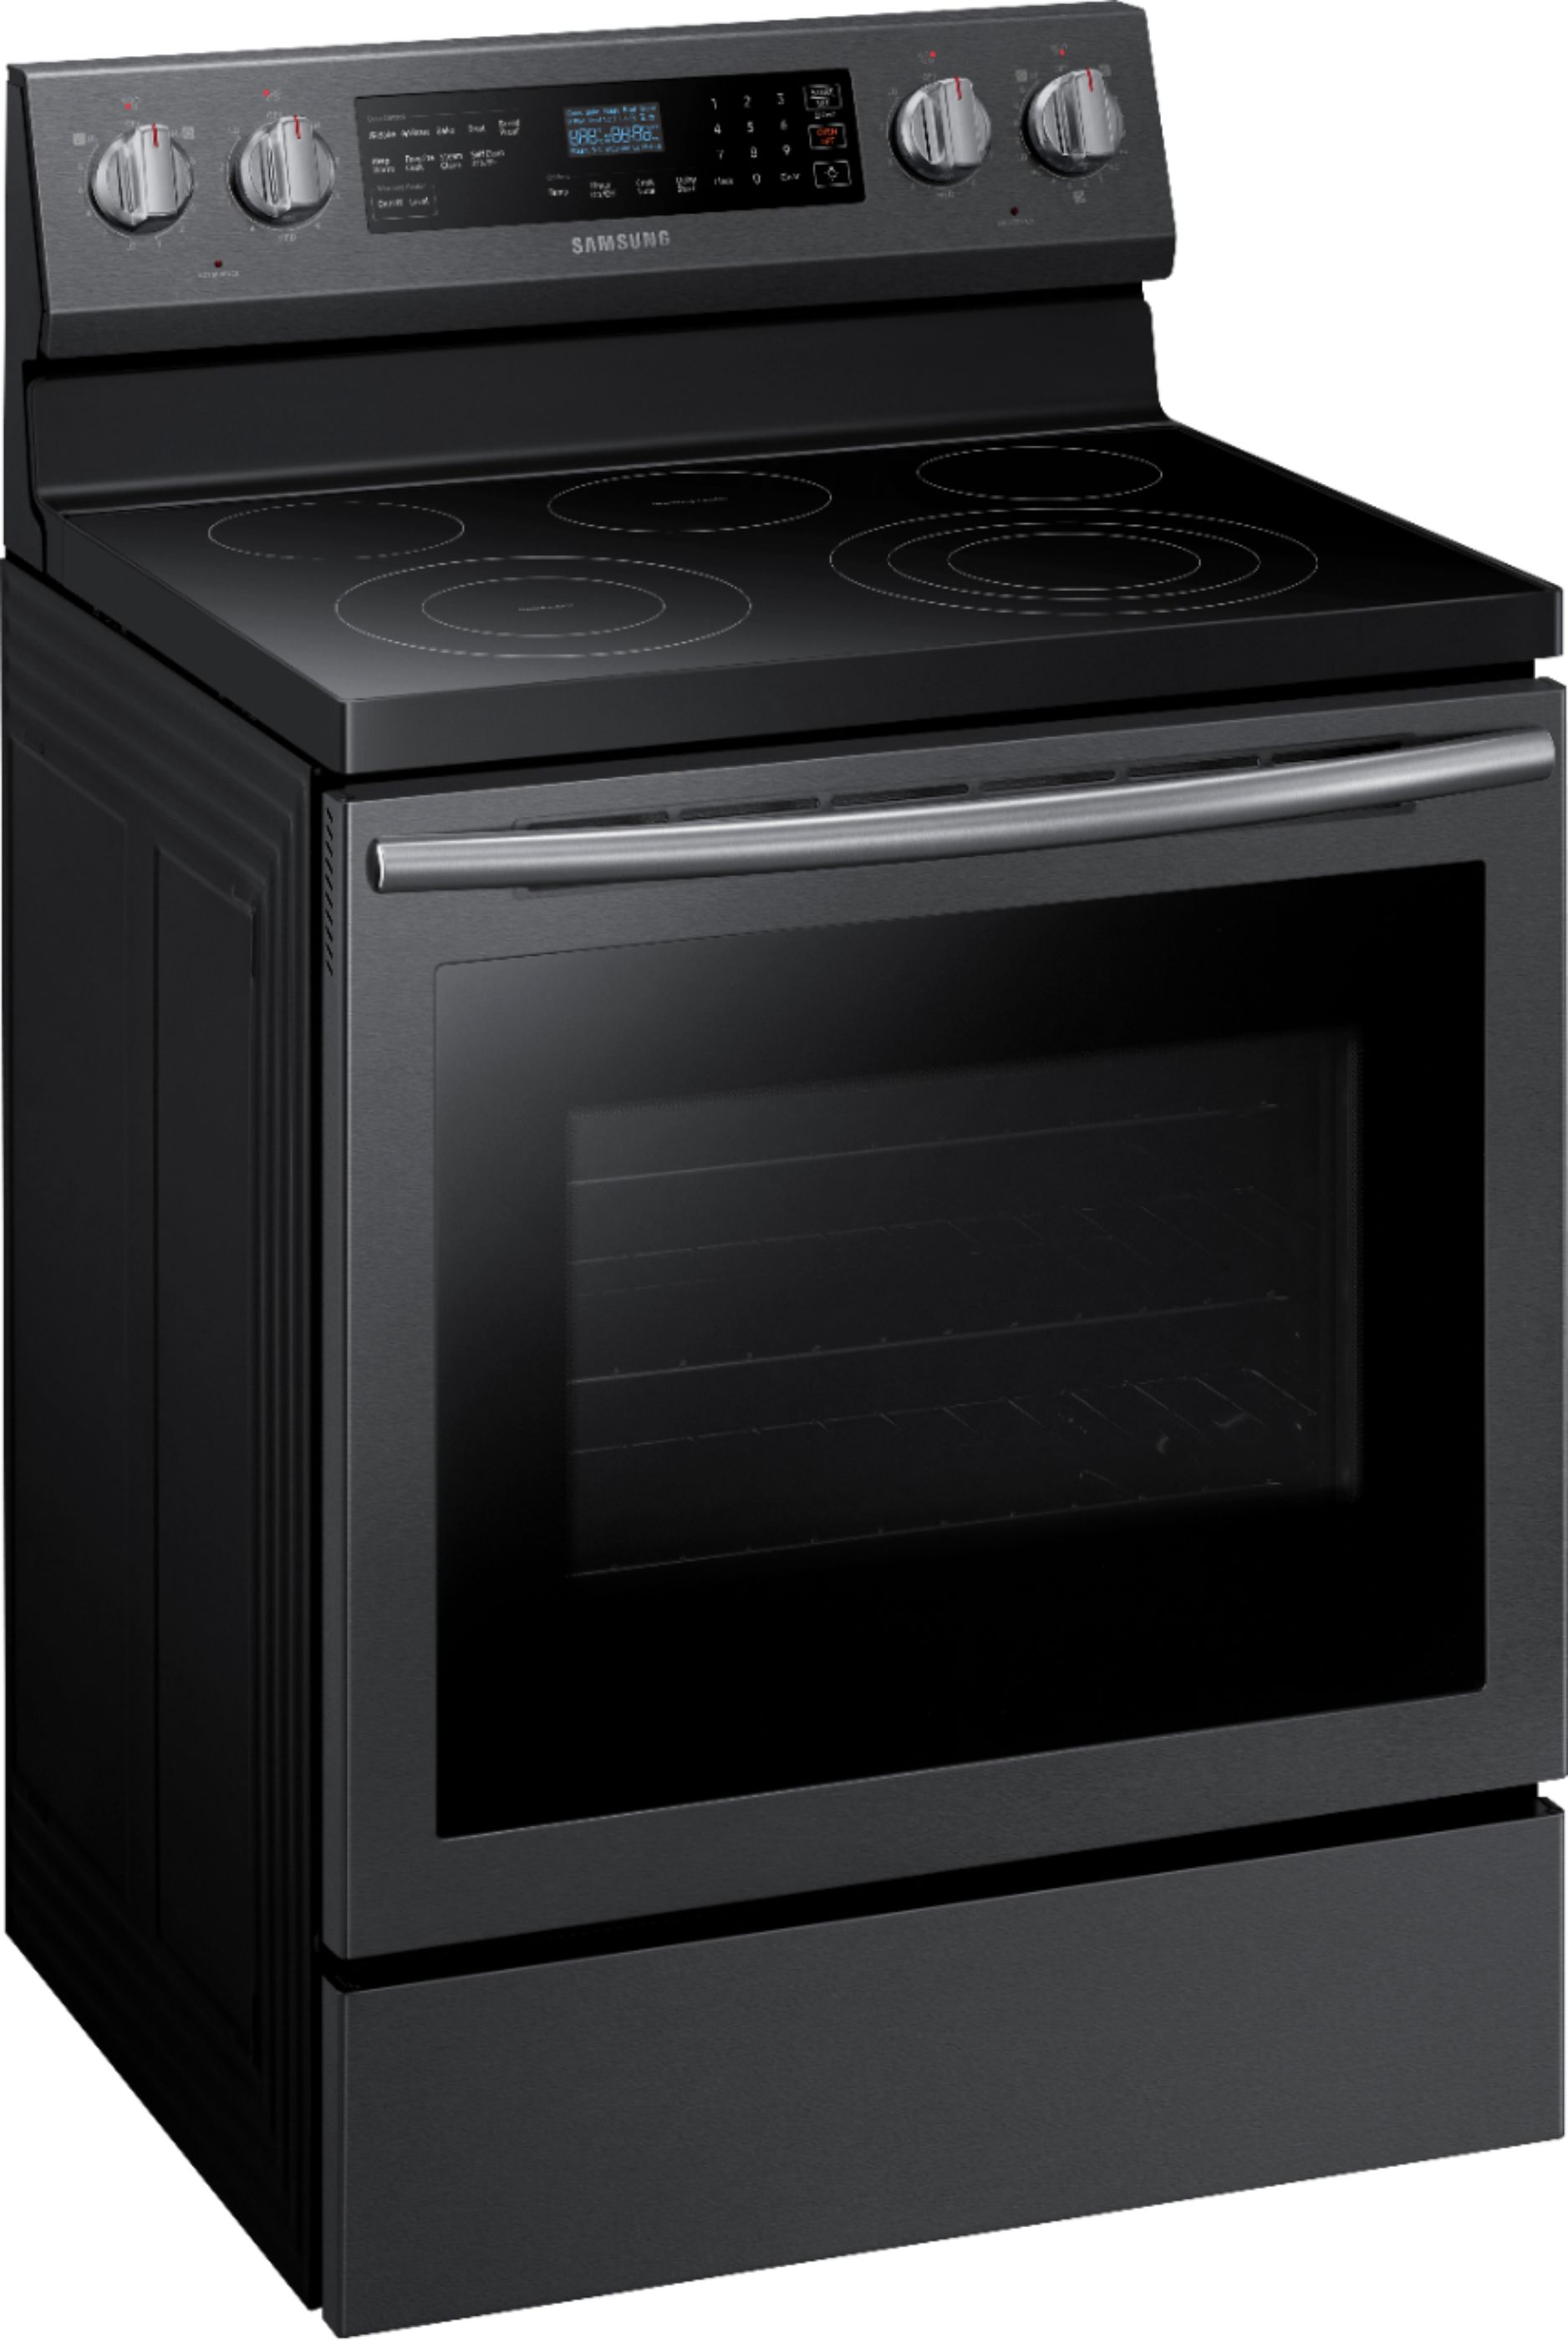 Angle View: Samsung - 5.8 cu. ft. Freestanding Electric Convection Range with Air Fry, Fingerprint Resistant - Stainless Steel